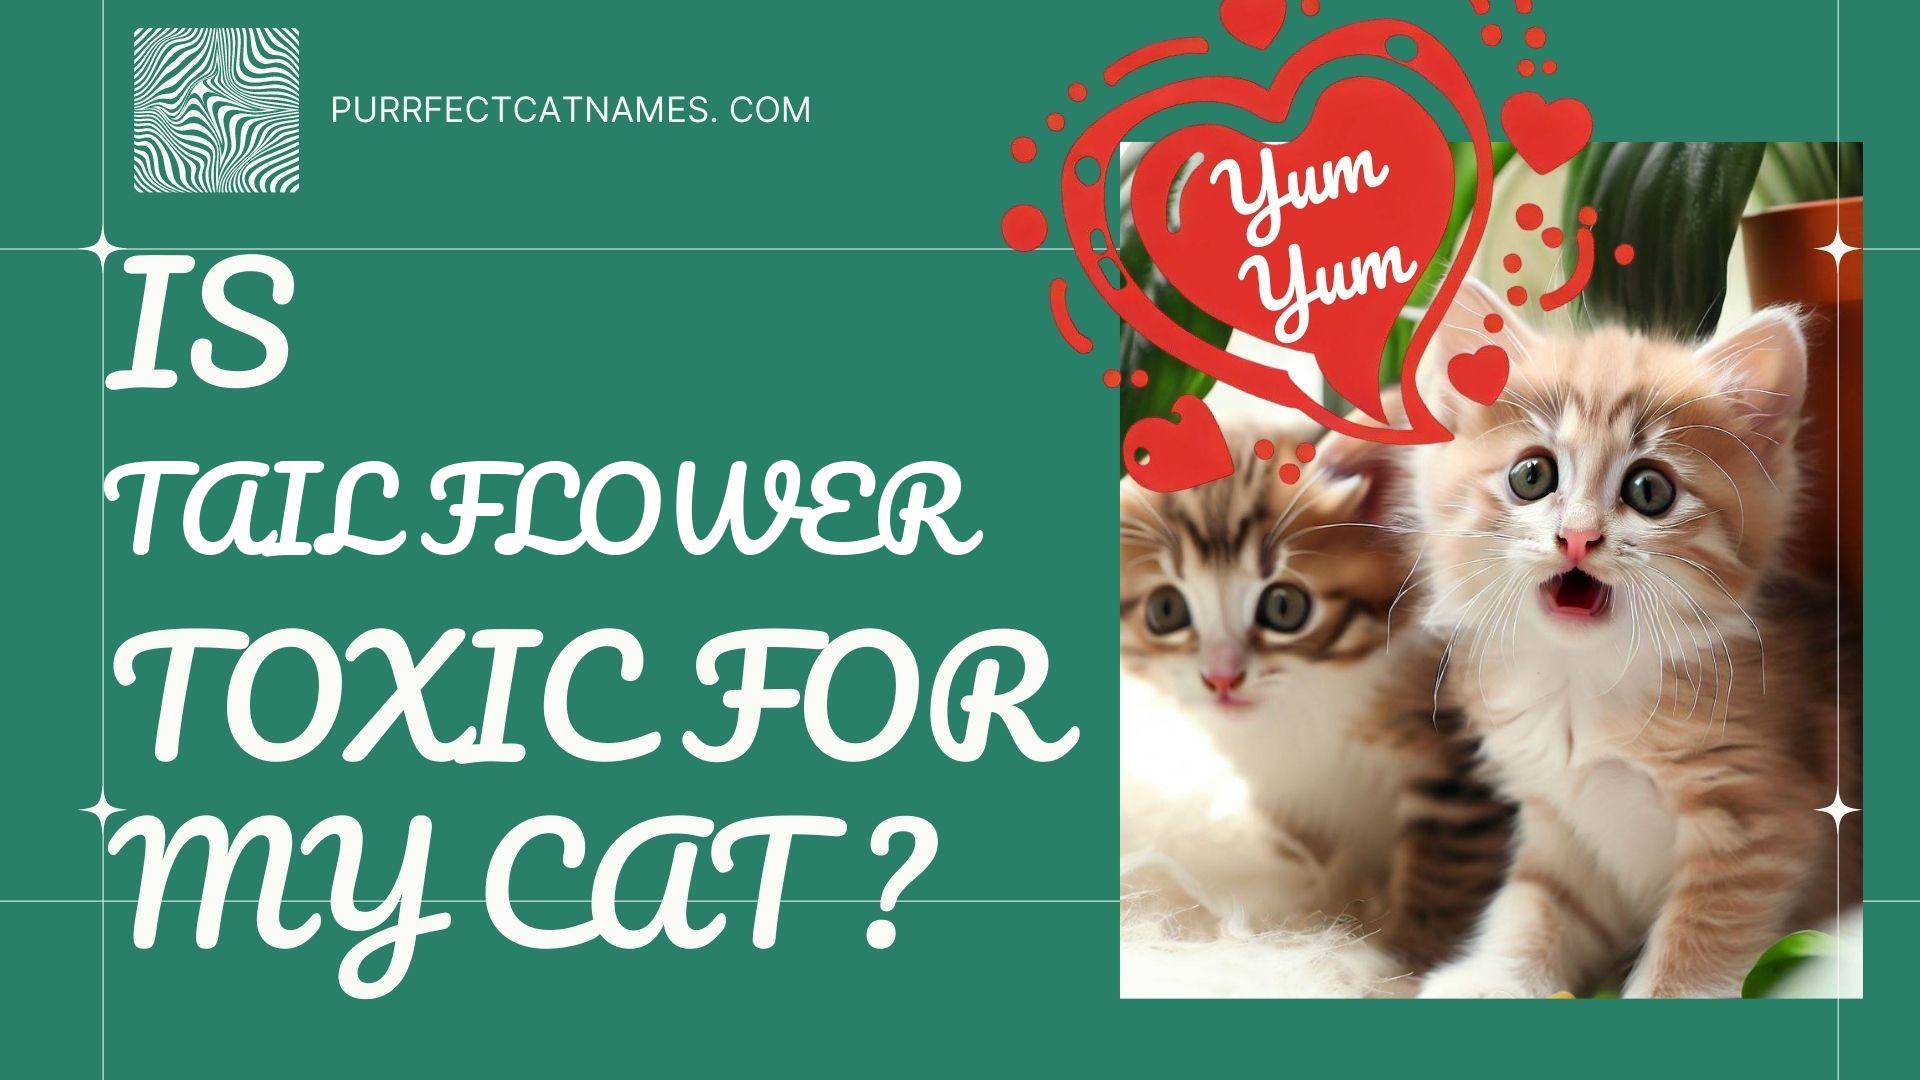 IsTail Flower plant toxic for your cat